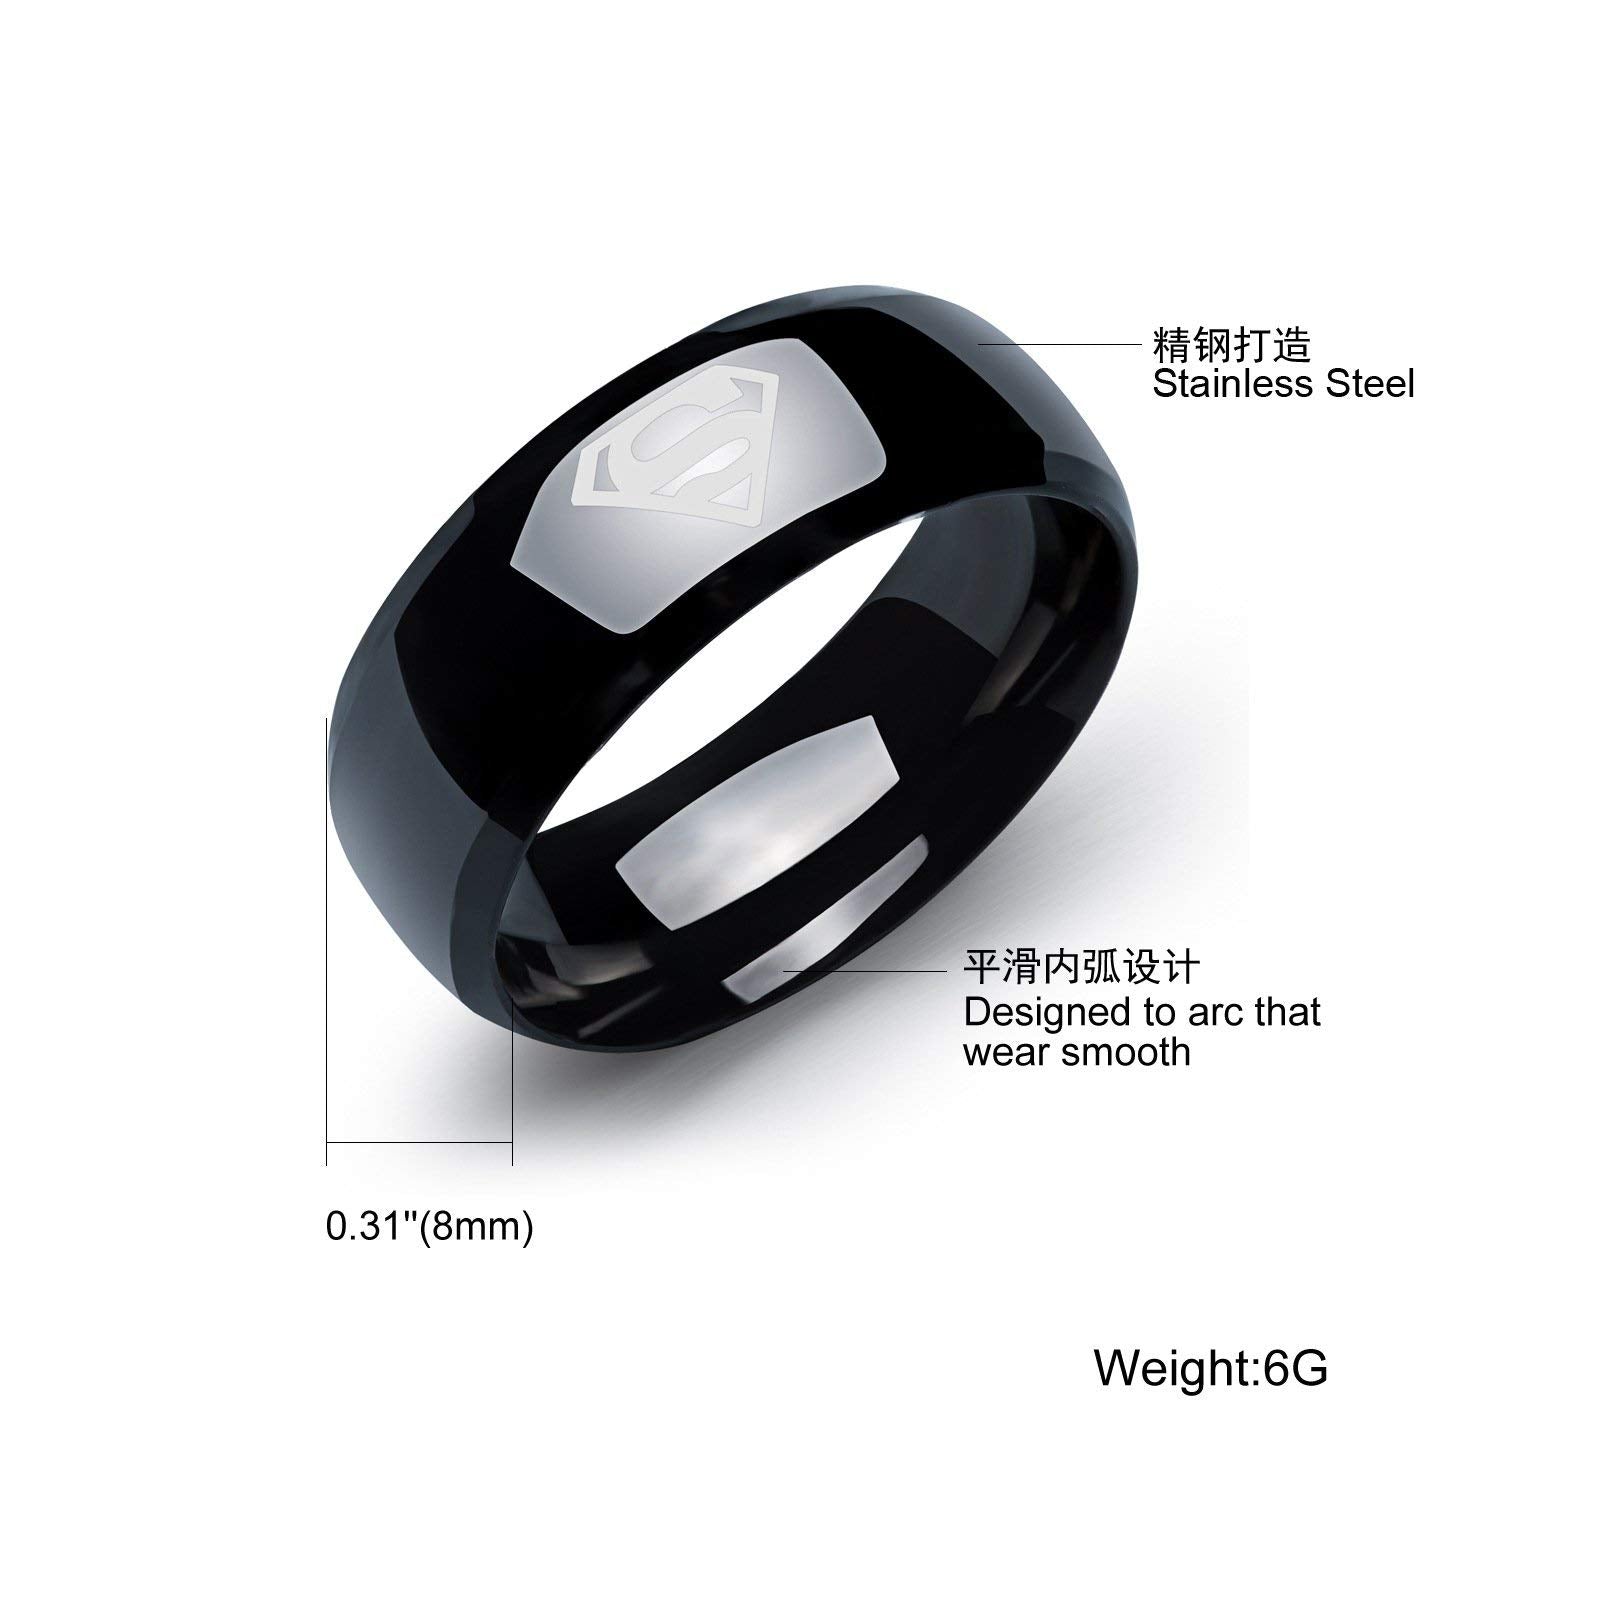 Buy Stainless Steel Rings - Rings for Man and Woman - DICCI